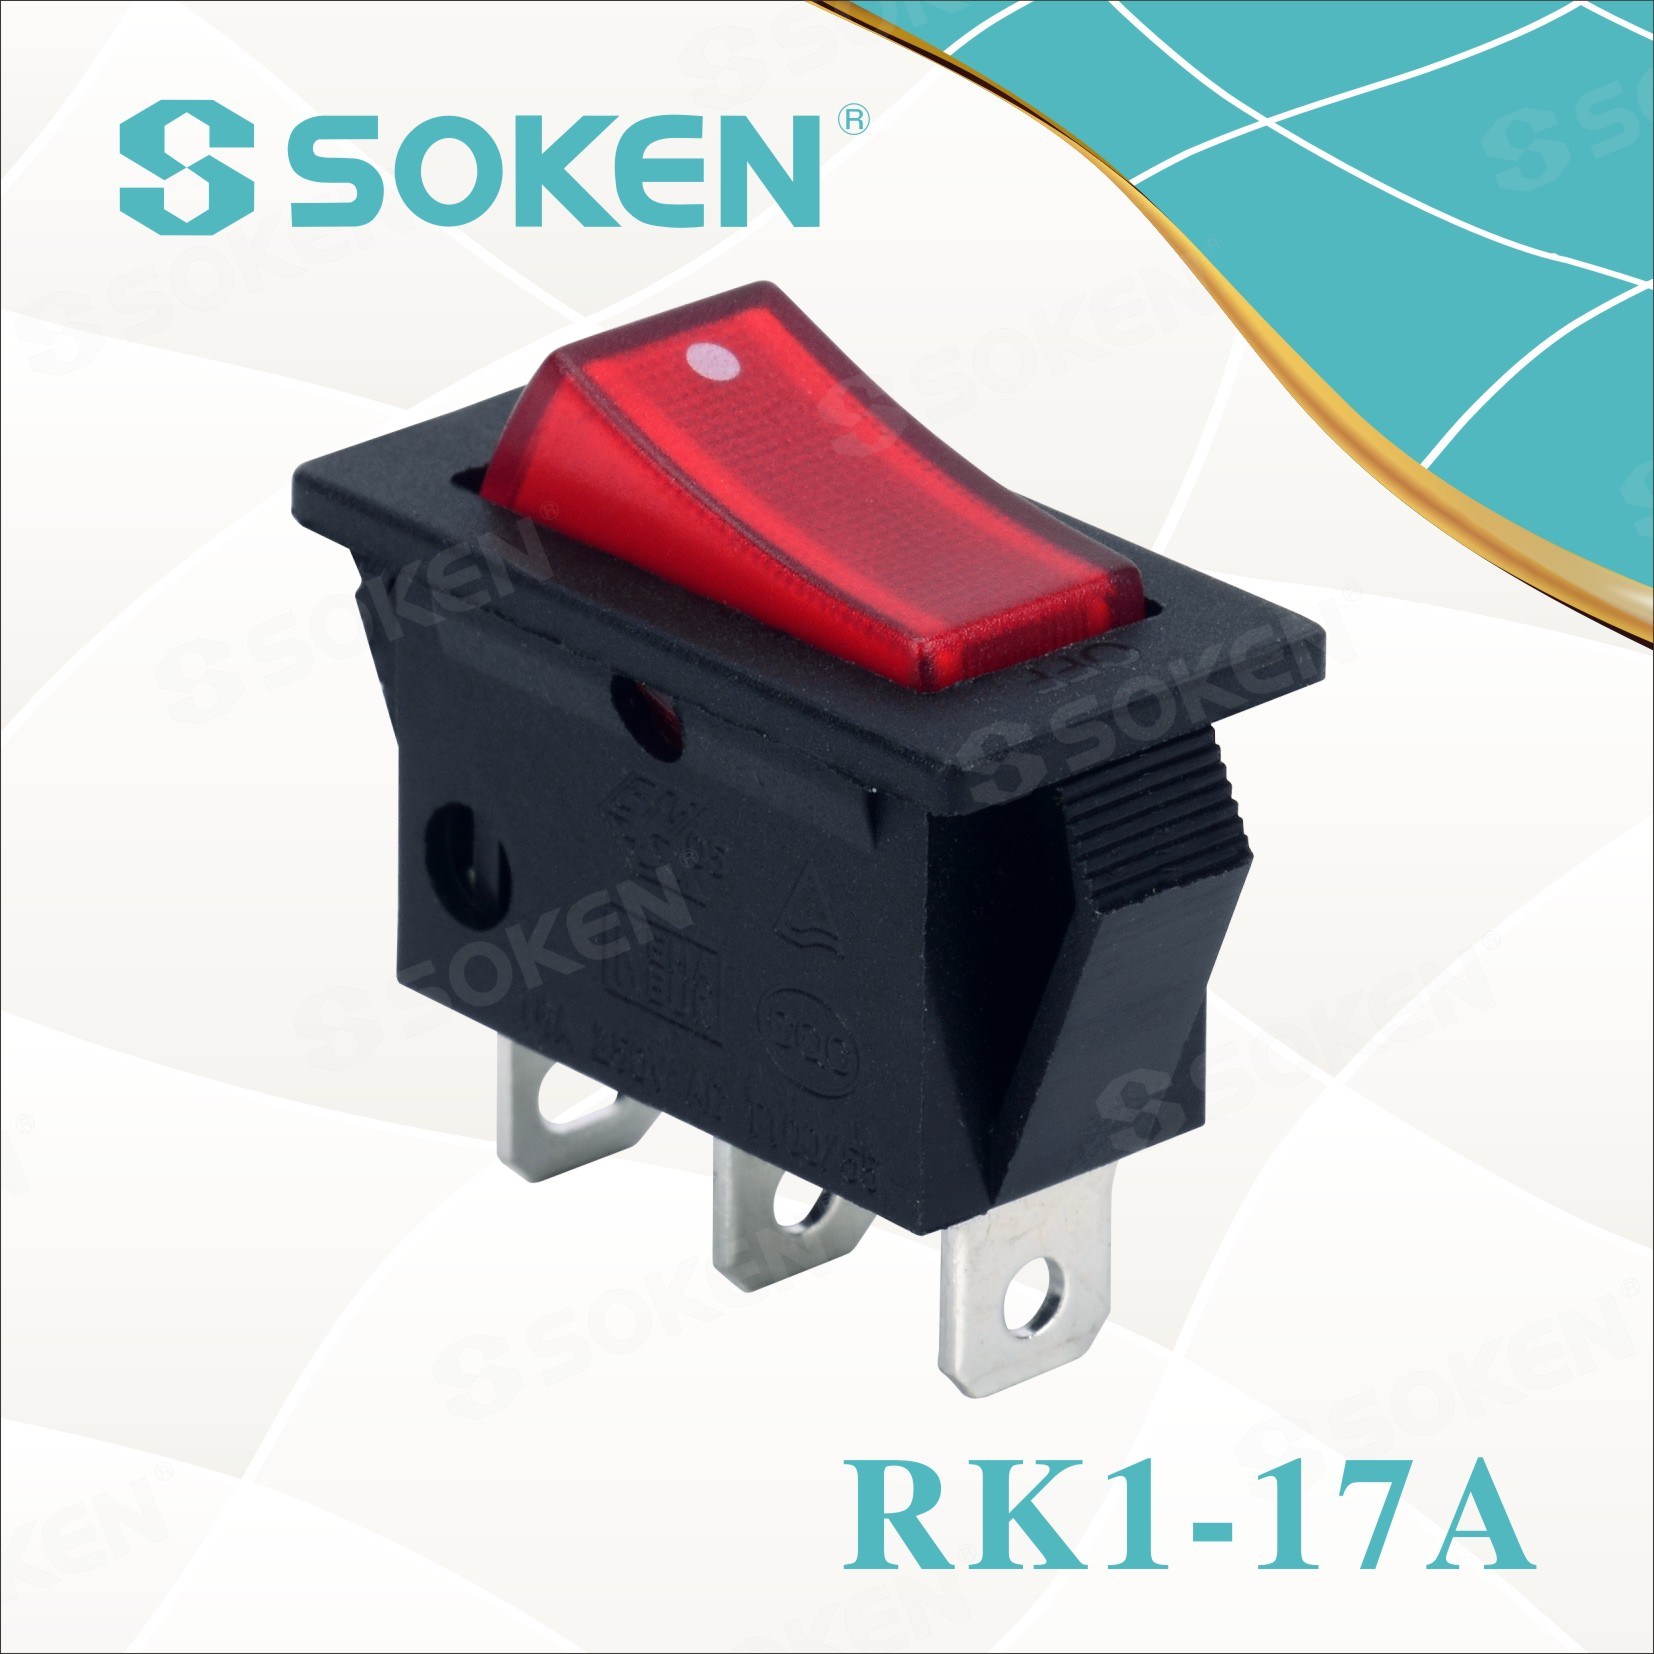 Factory For Electronics Switch - Soken Rk1-17A 1X1n Red on off Illuminated Rocker Switch – Master Soken Electrical